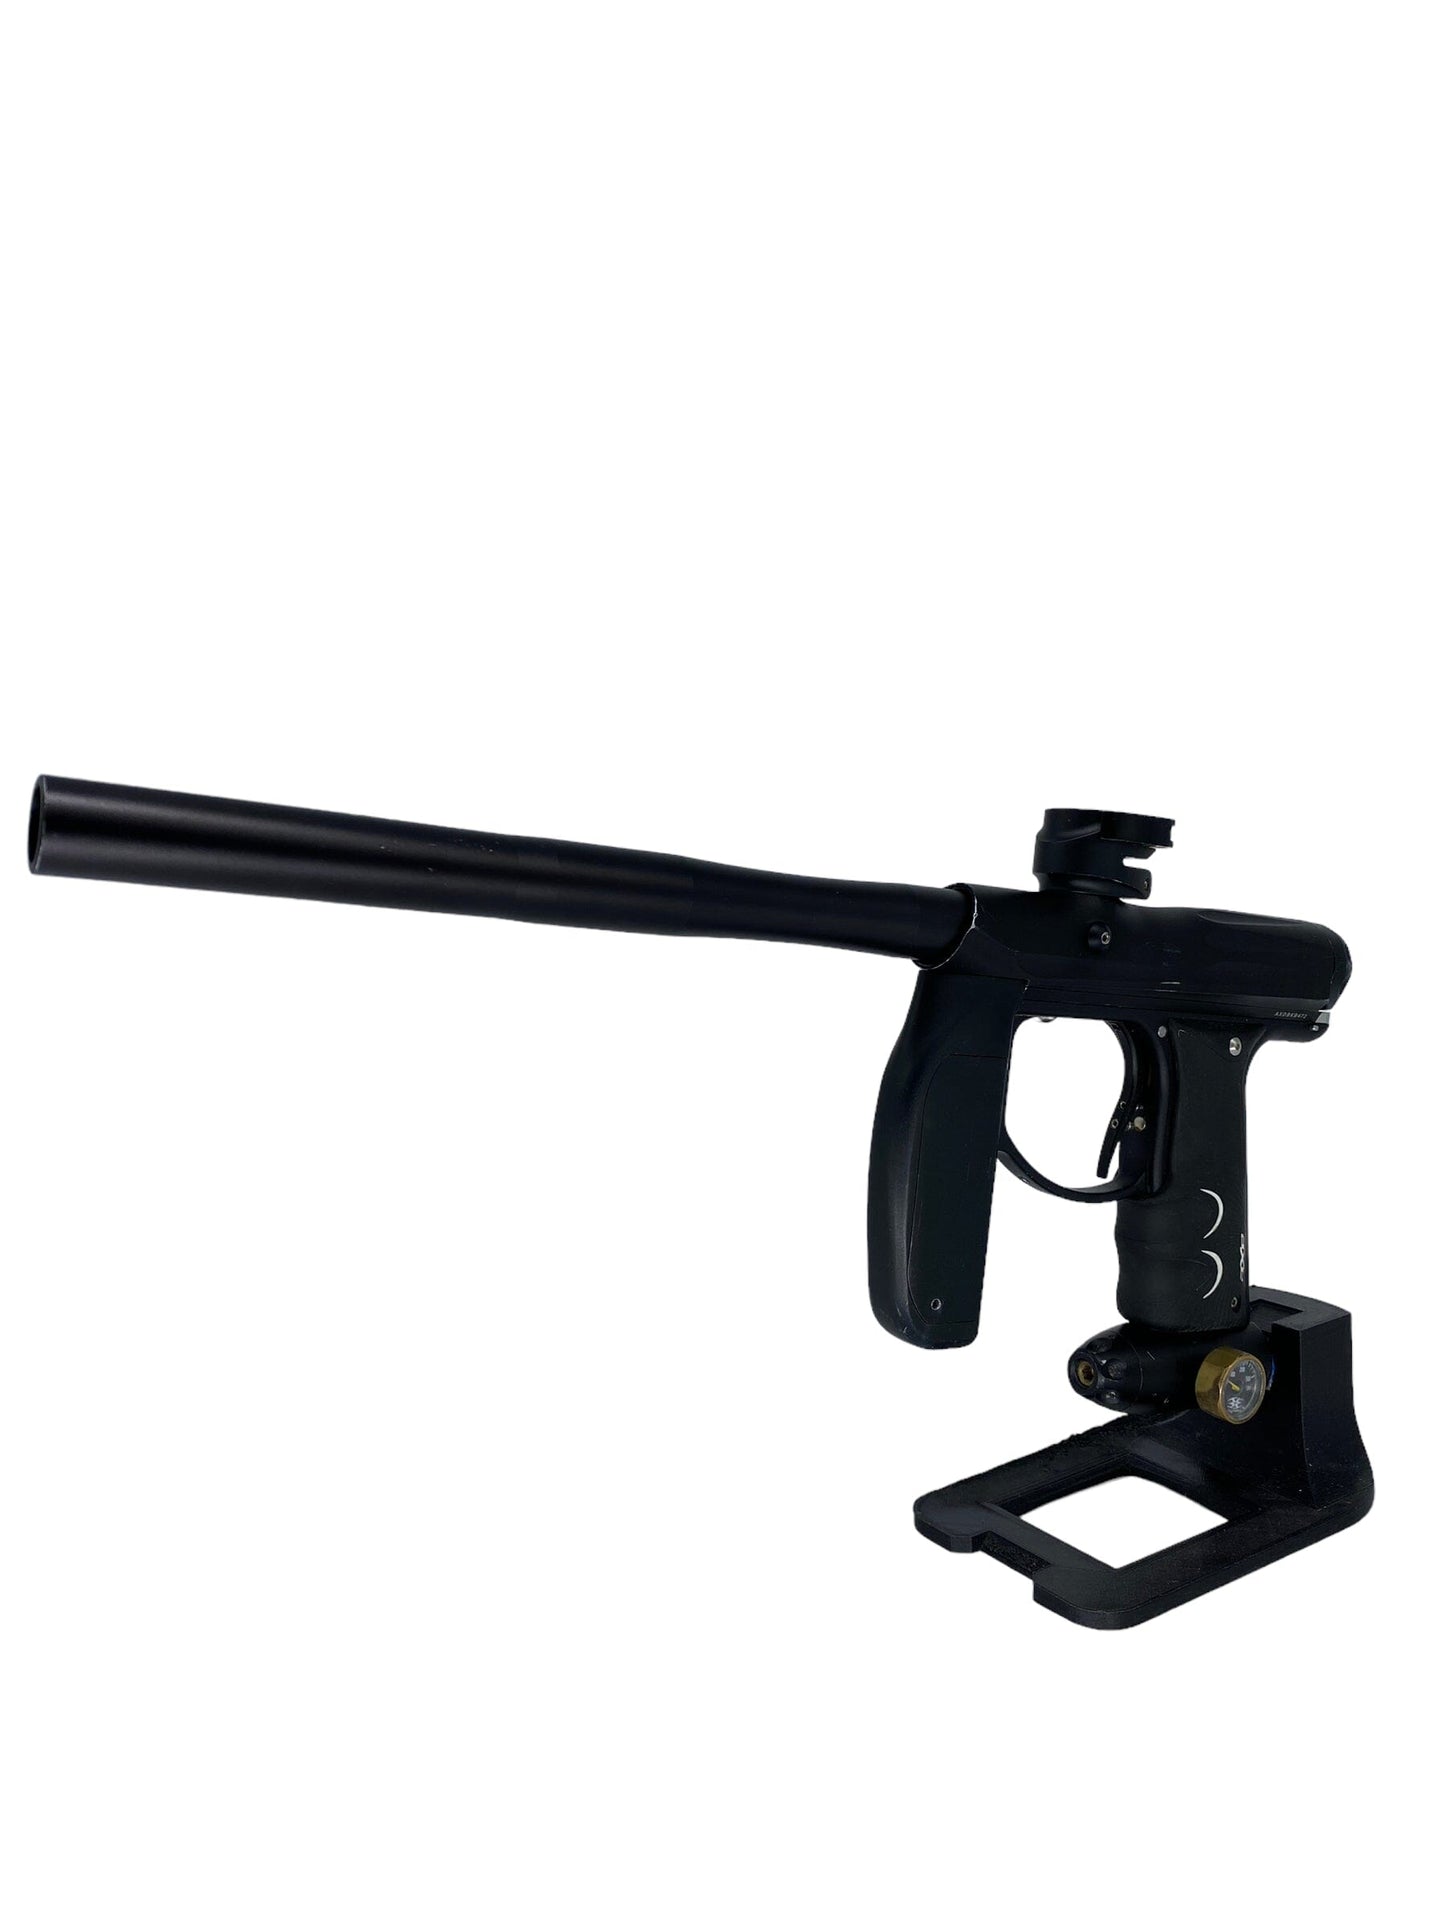 Used Empire Axe Paintball Gun from CPXBrosPaintball Buy/Sell/Trade Paintball Markers, Paintball Hoppers, Paintball Masks, and Hormesis Headbands